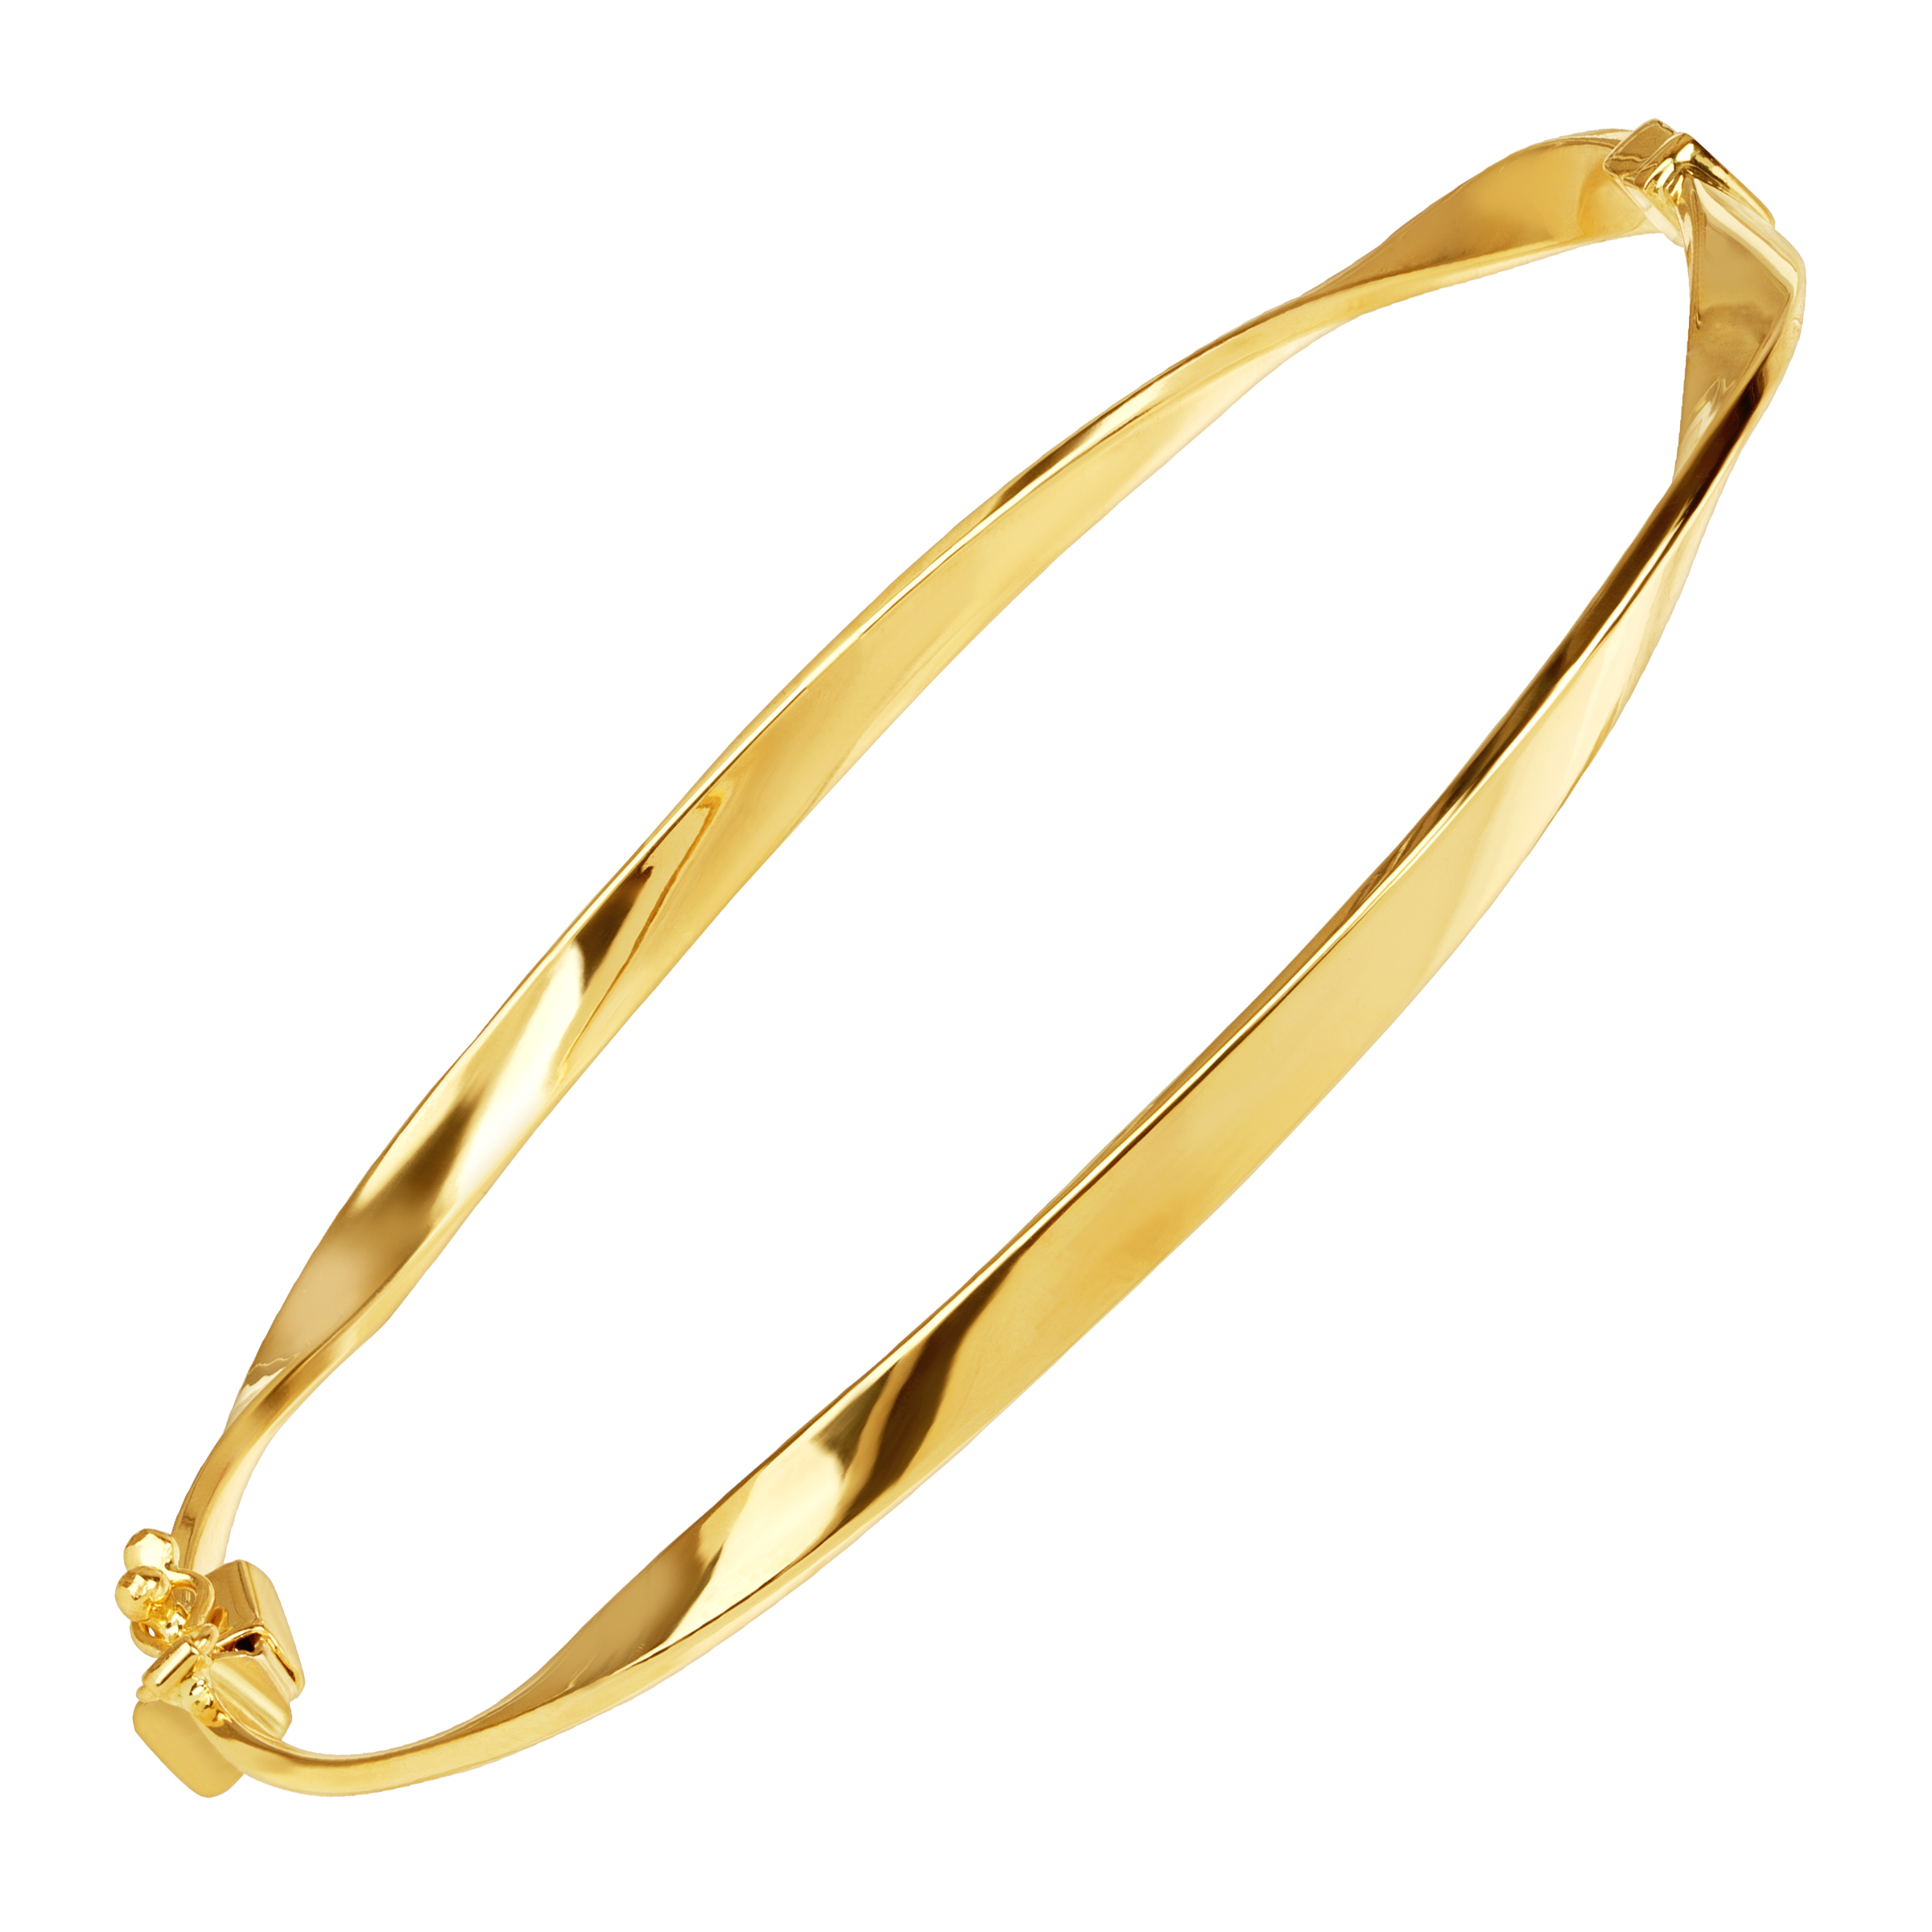 Pre-owned Welry Twisted Bangle Bracelet In 14k Yellow Gold, 8"